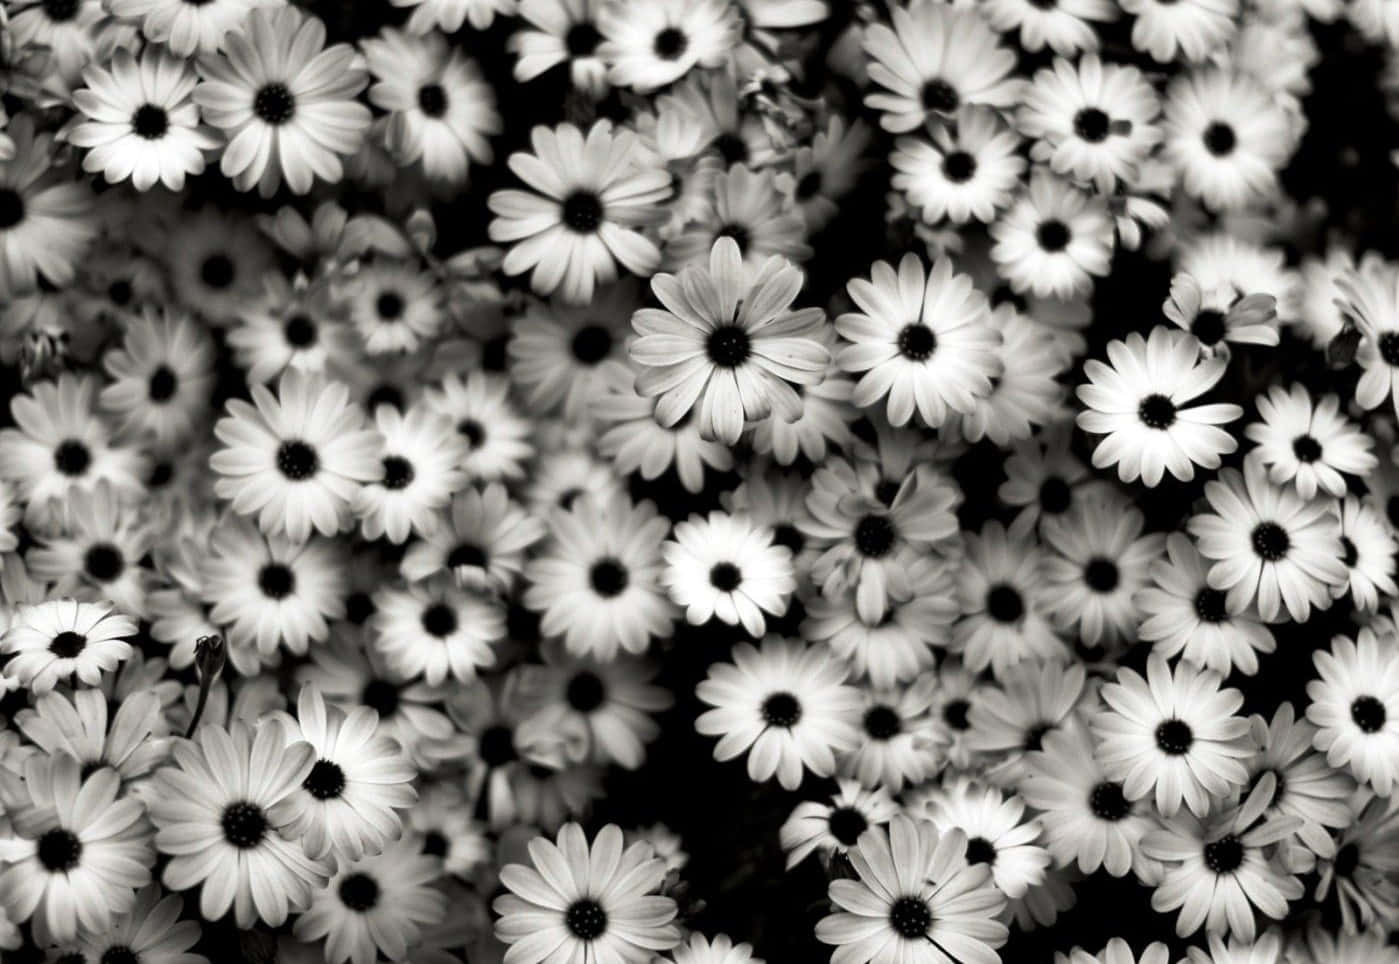 Black And White Photo Of A Bunch Of Daisies